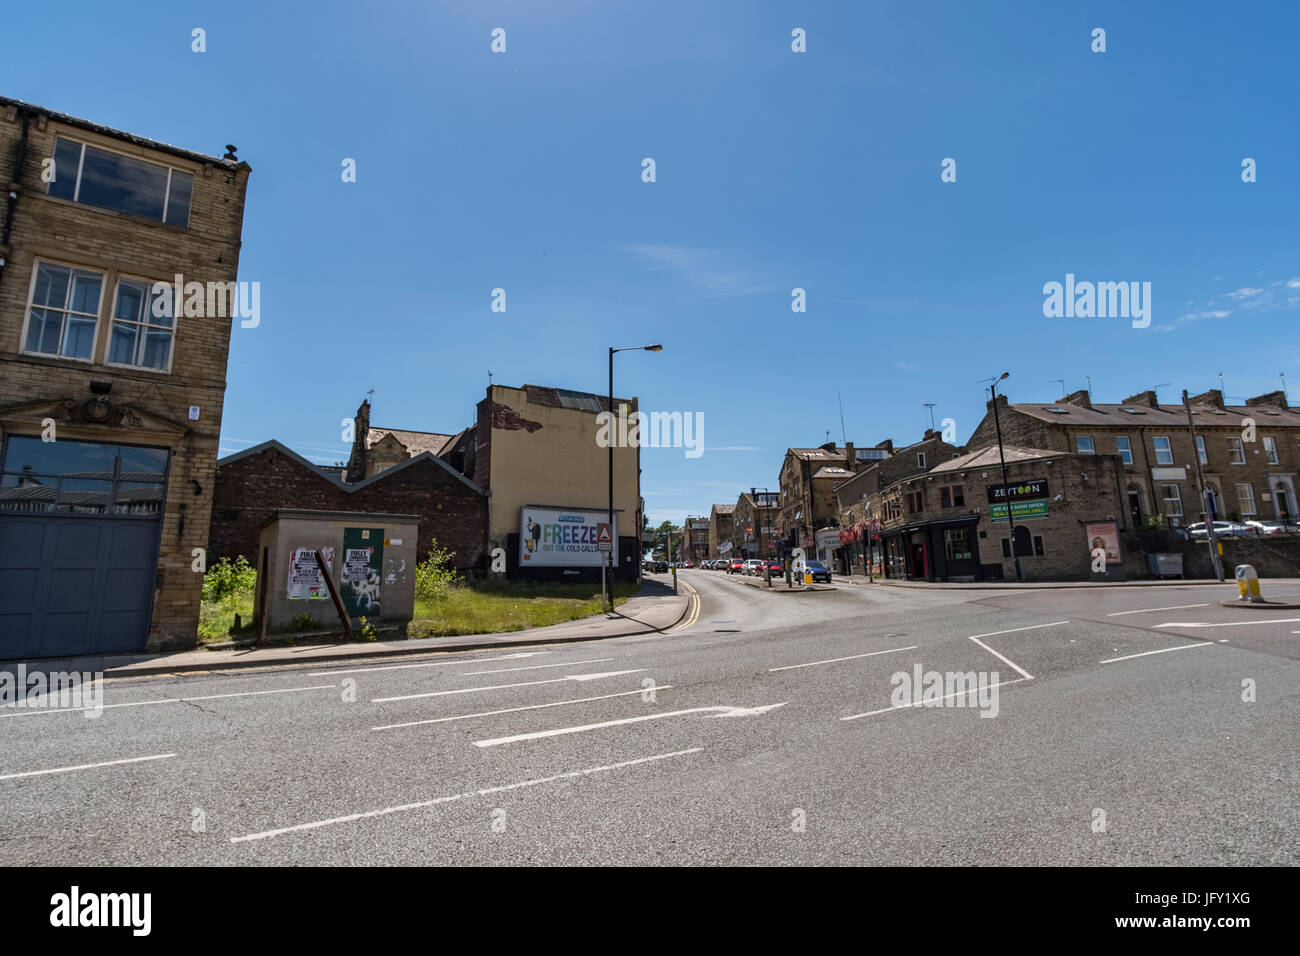 Some of Bradford's pubs and former nightclubs, shot in July 2017 Stock Photo